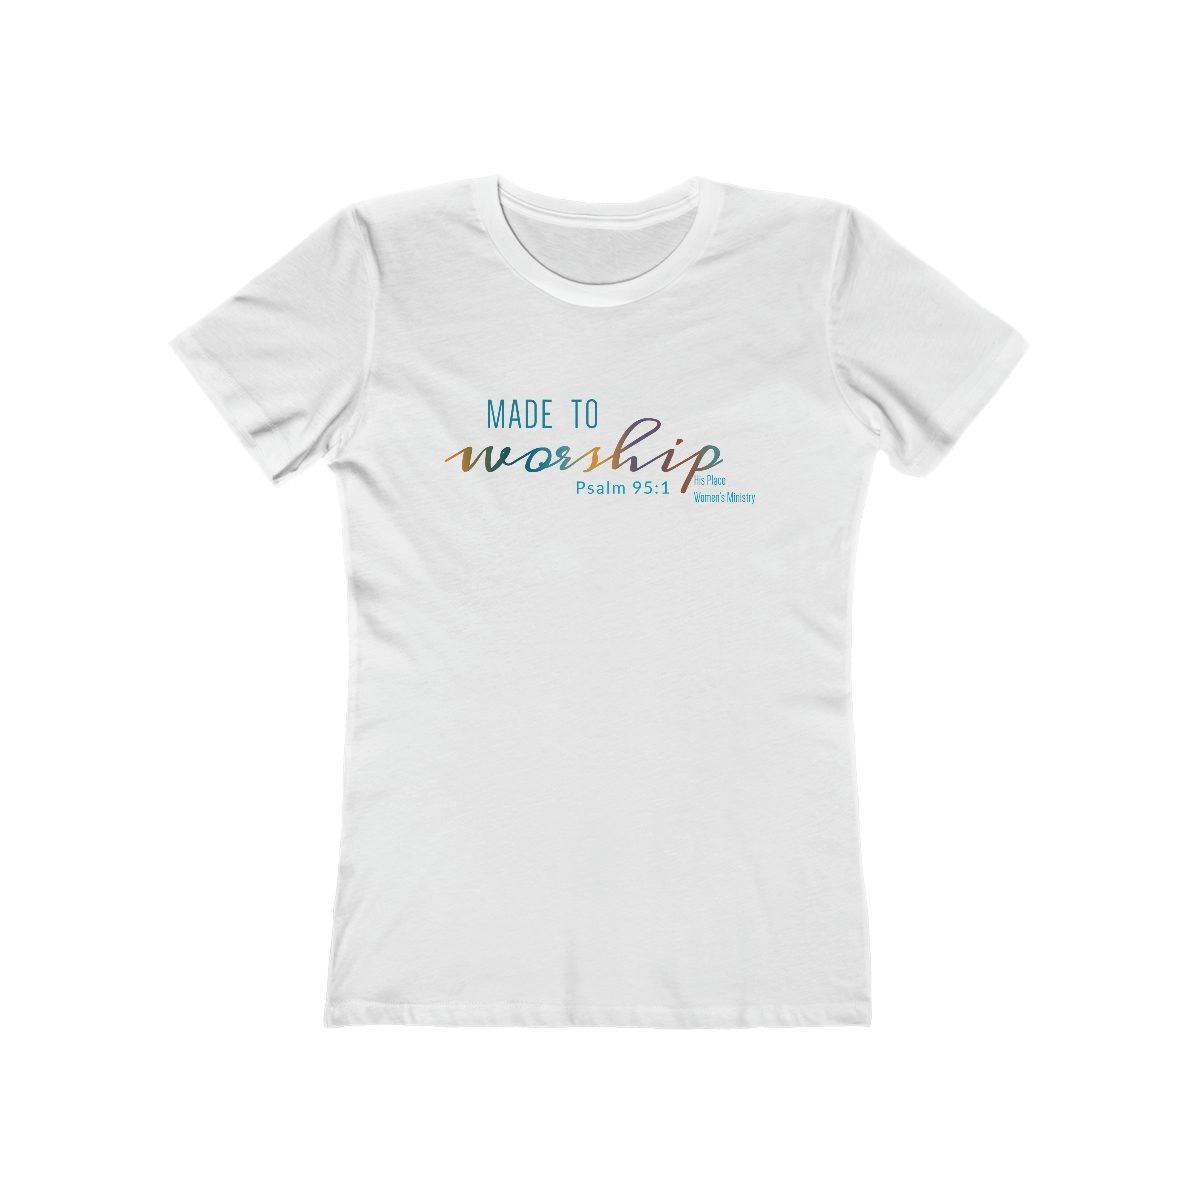 His Place Women’s Ministry – Made To Worship Women’s Short Sleeve Tshirt